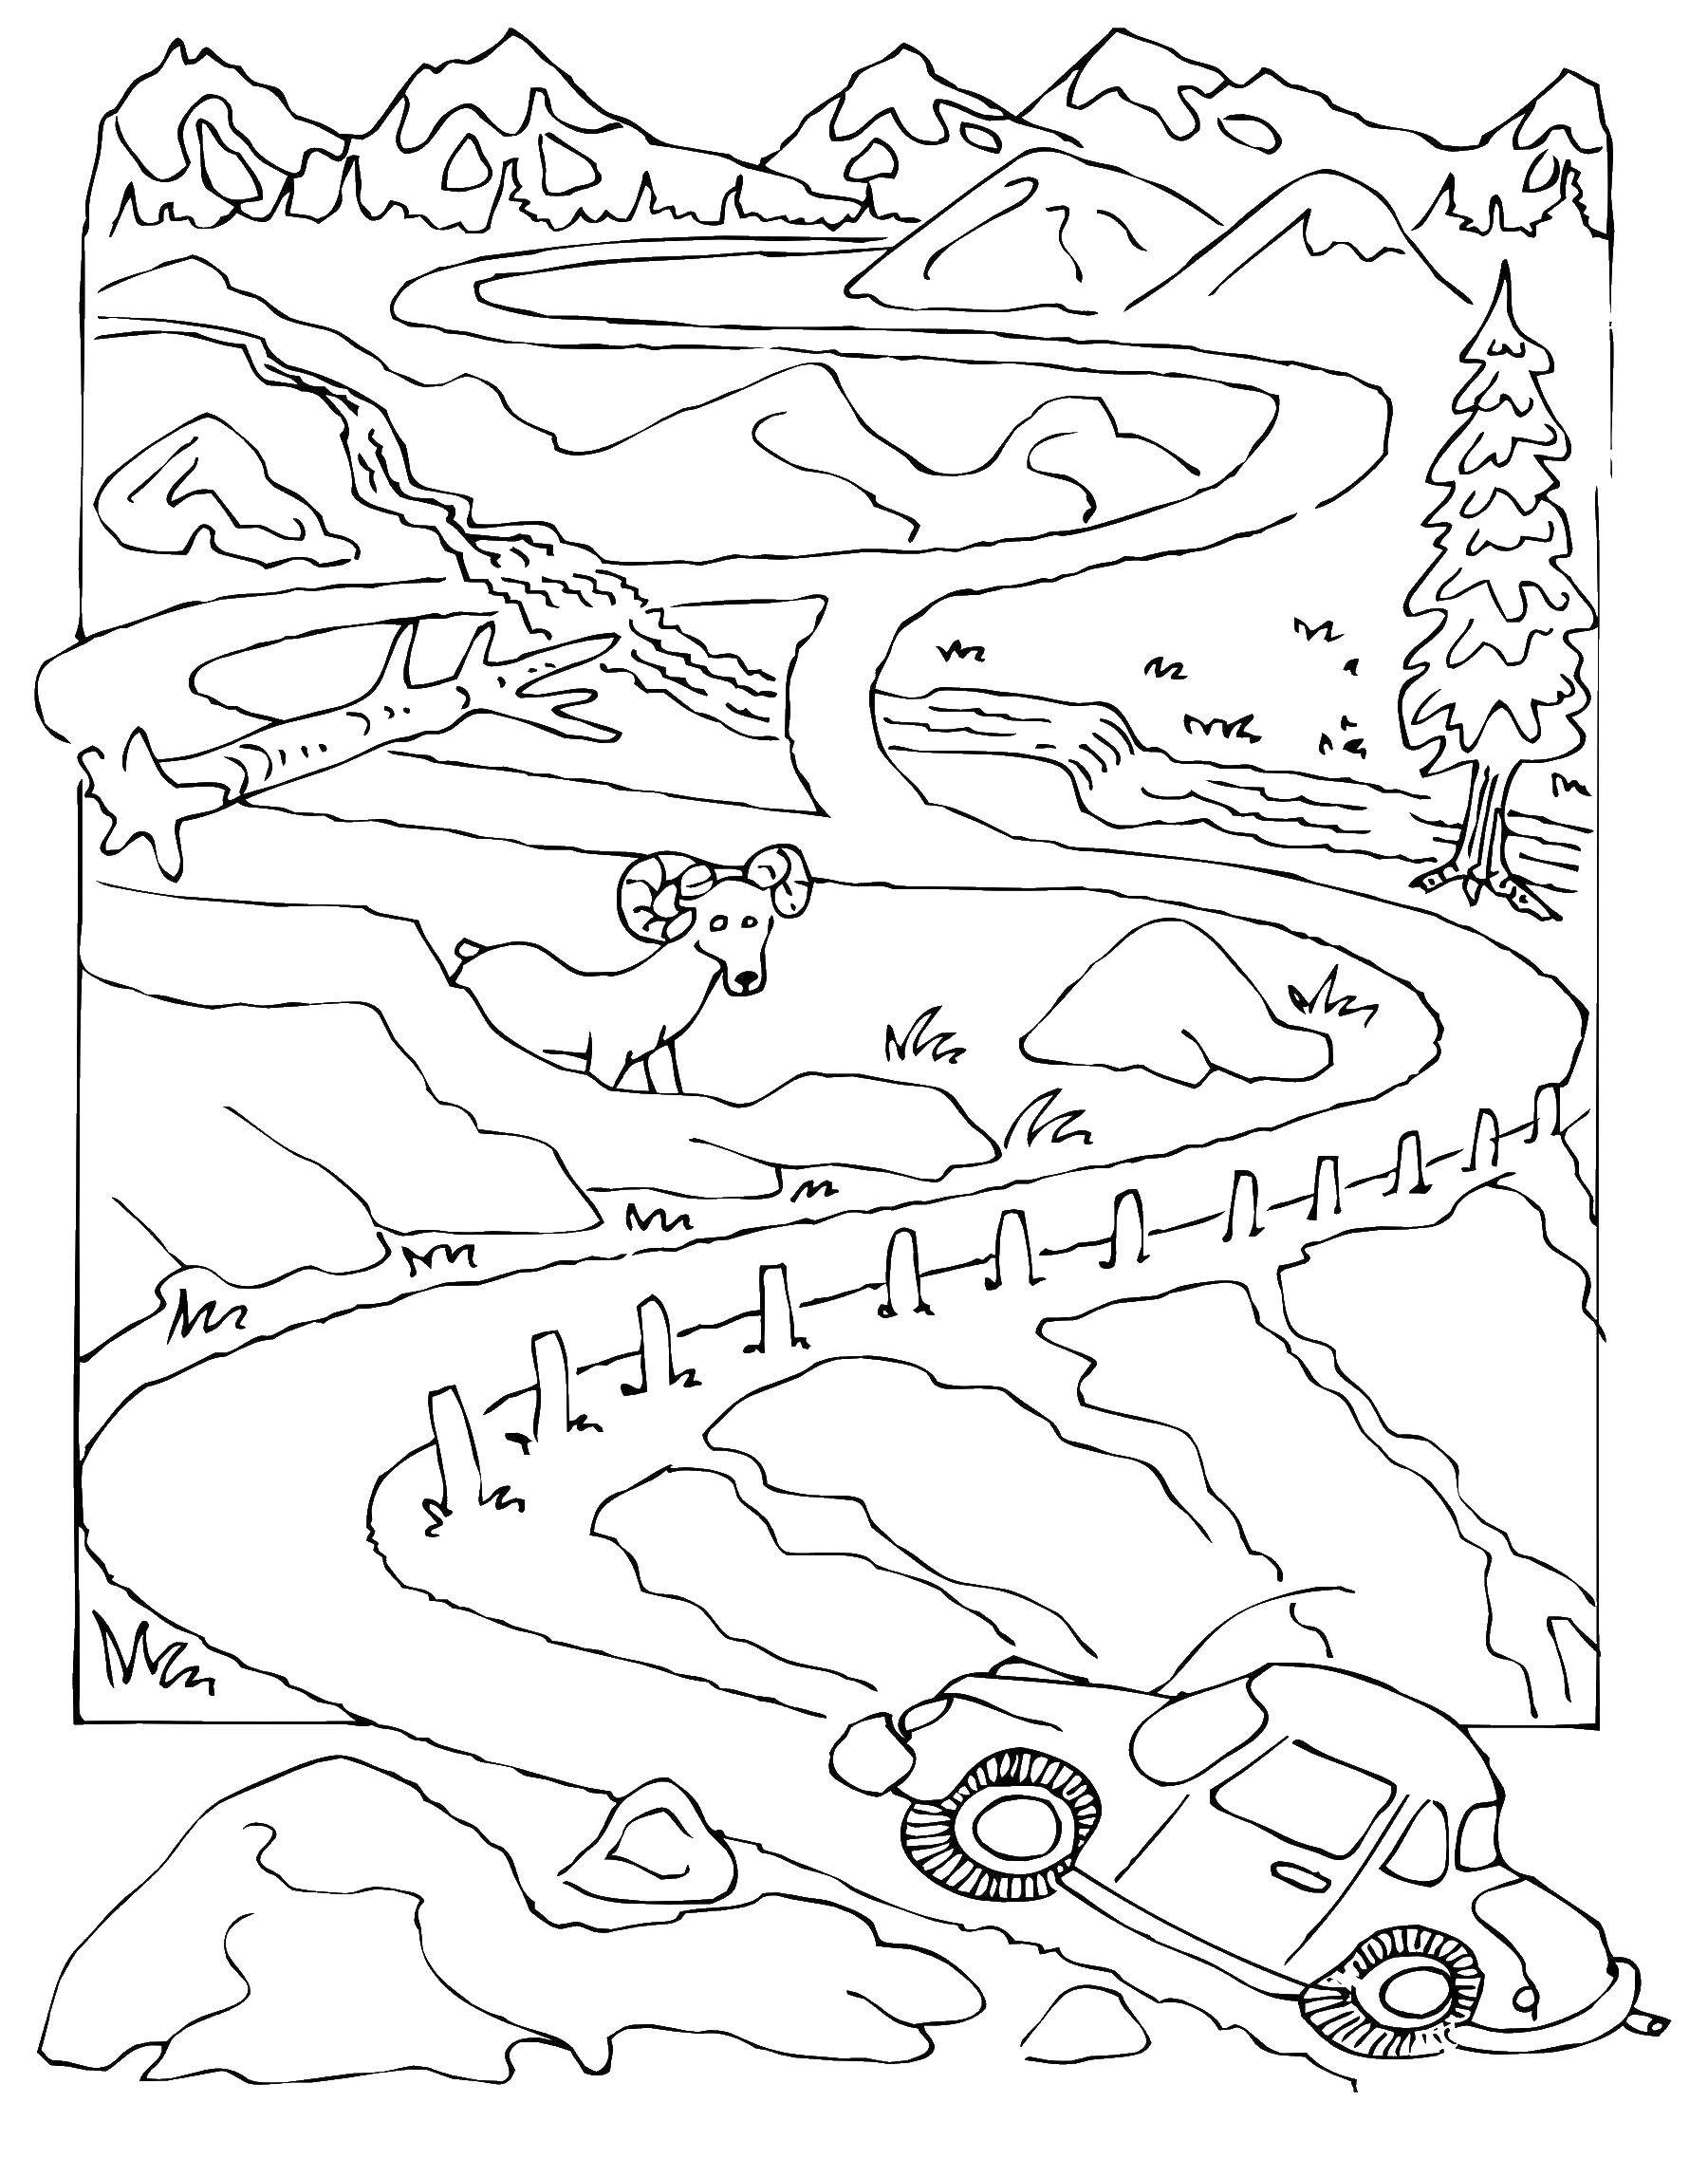 Coloring Maze. Category Mazes. Tags:  maze, nature.